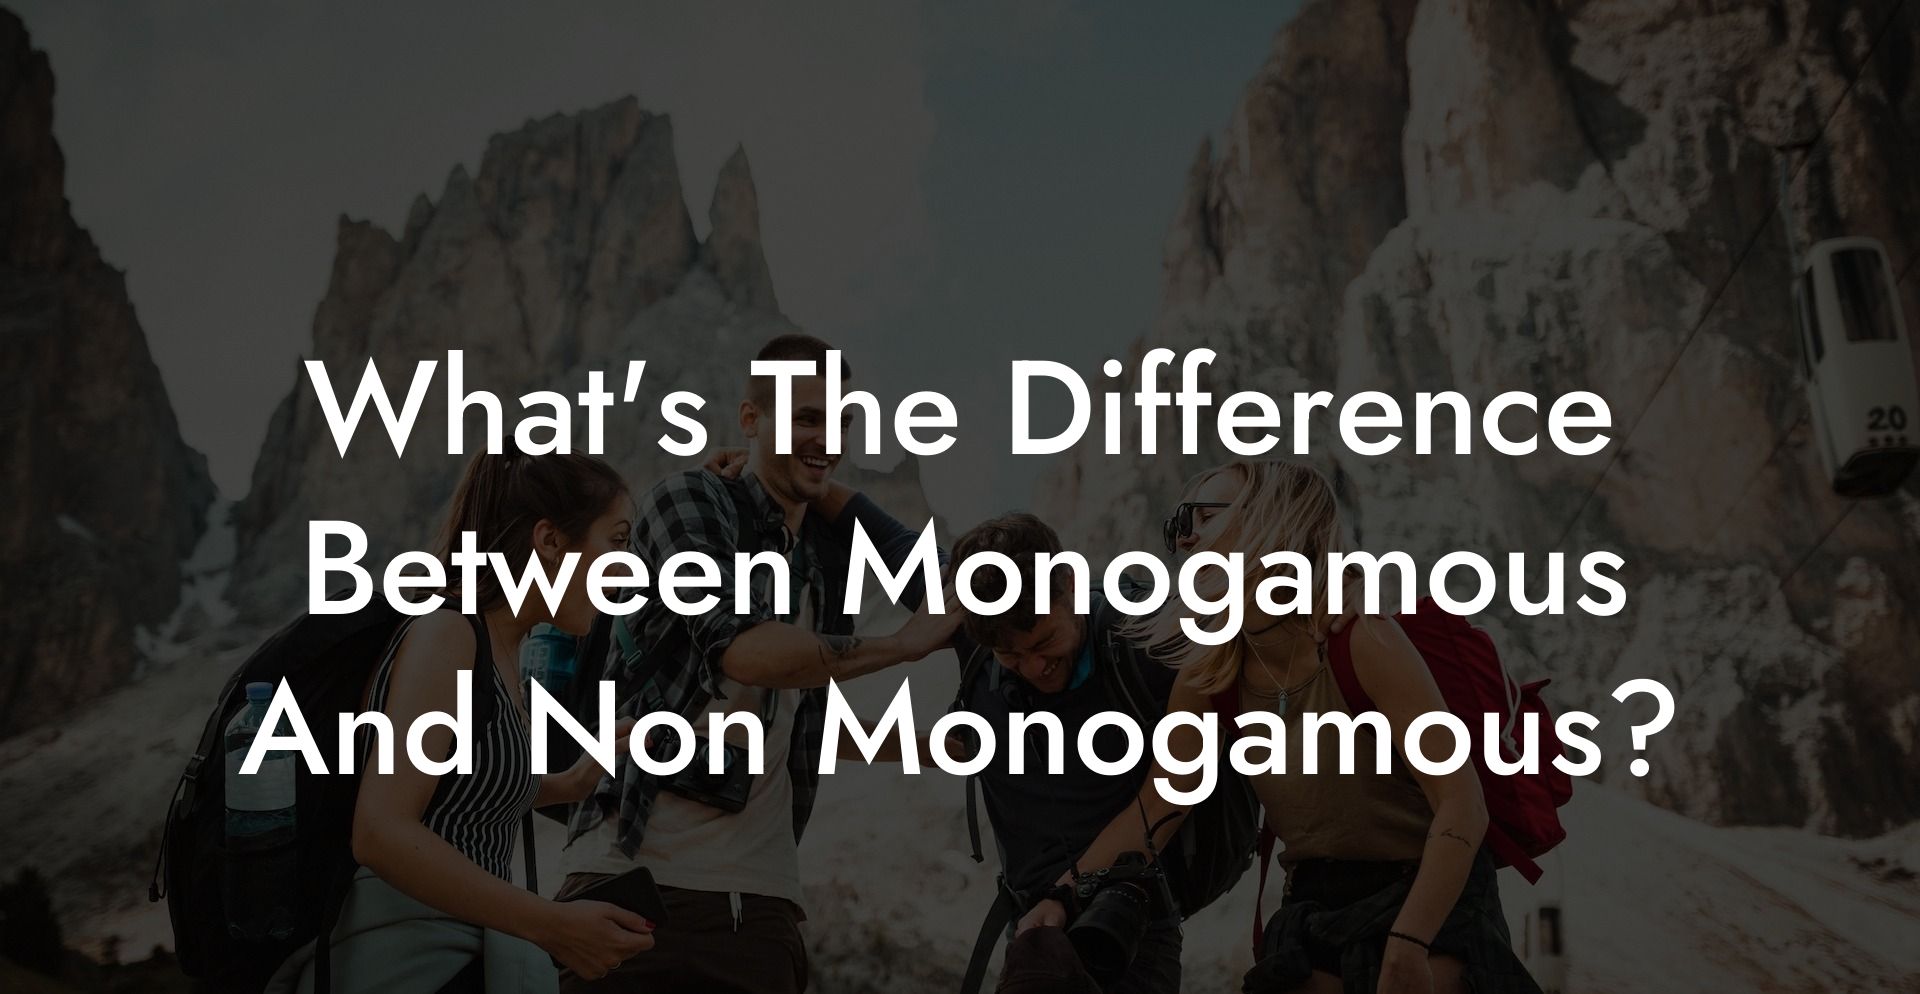 What's The Difference Between Monogamous And Non Monogamous?